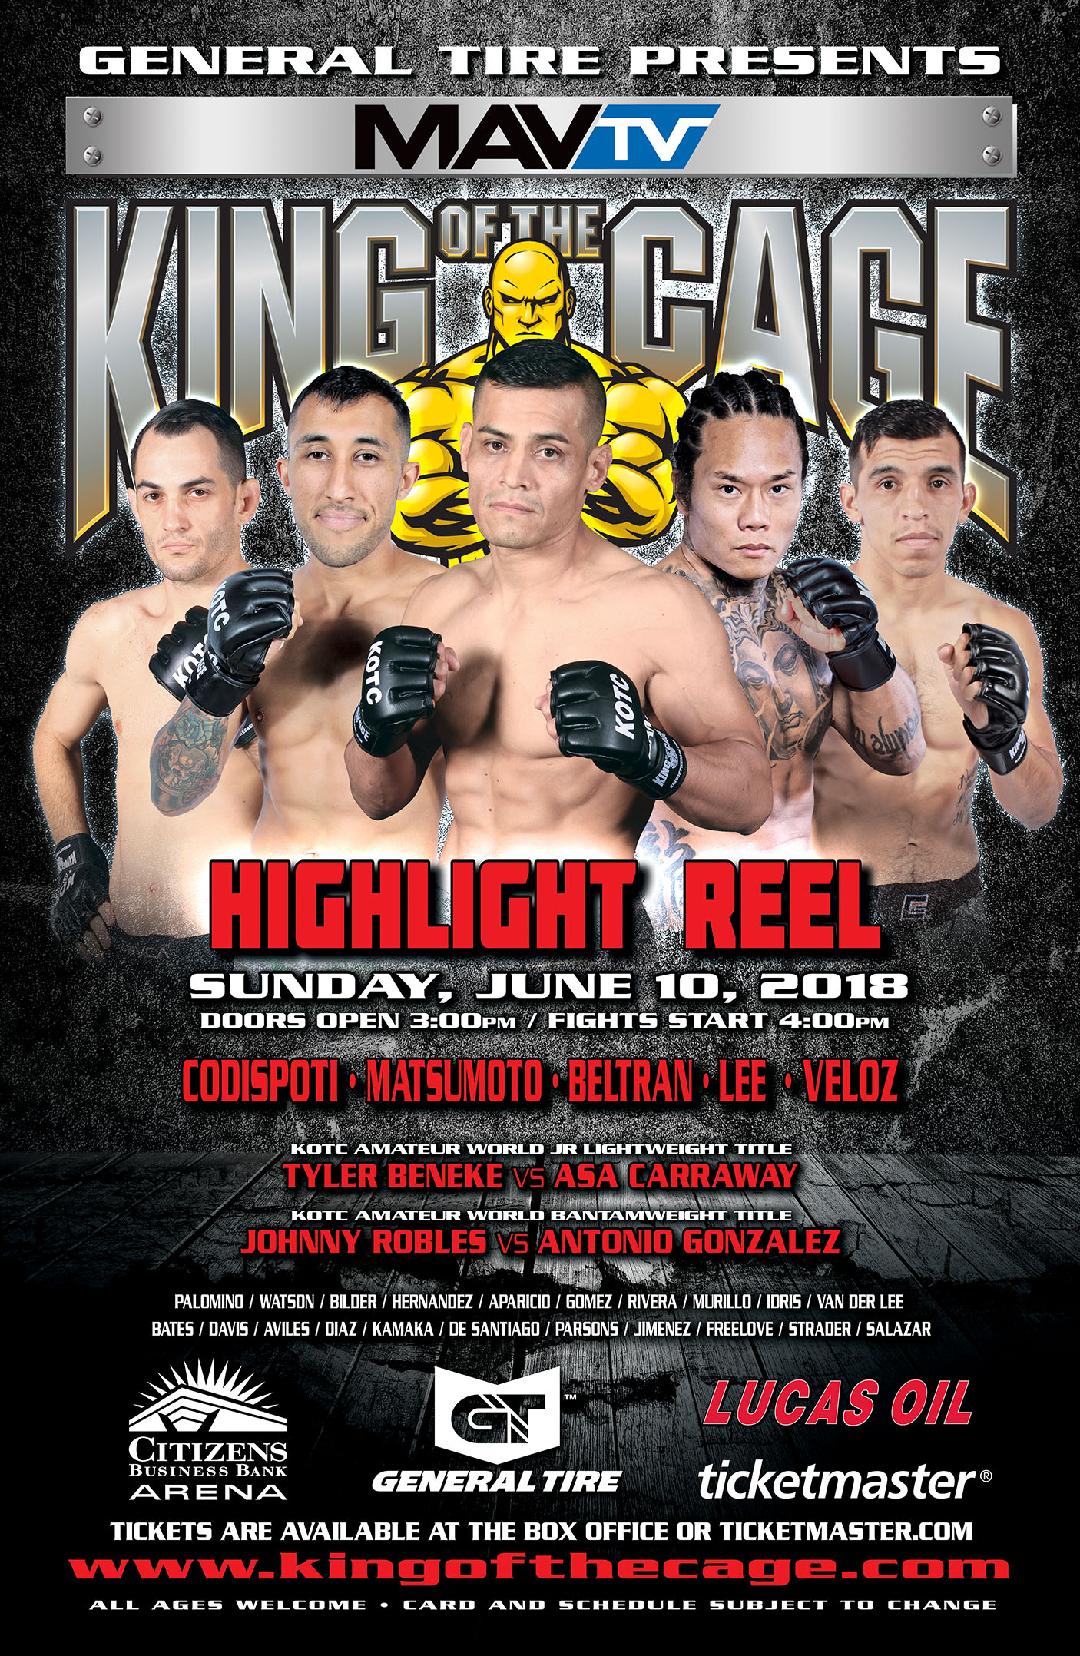 King of the Cage Returns to Citizens Business Bank Arena on June 10 for “HIGHLIGHT REEL”